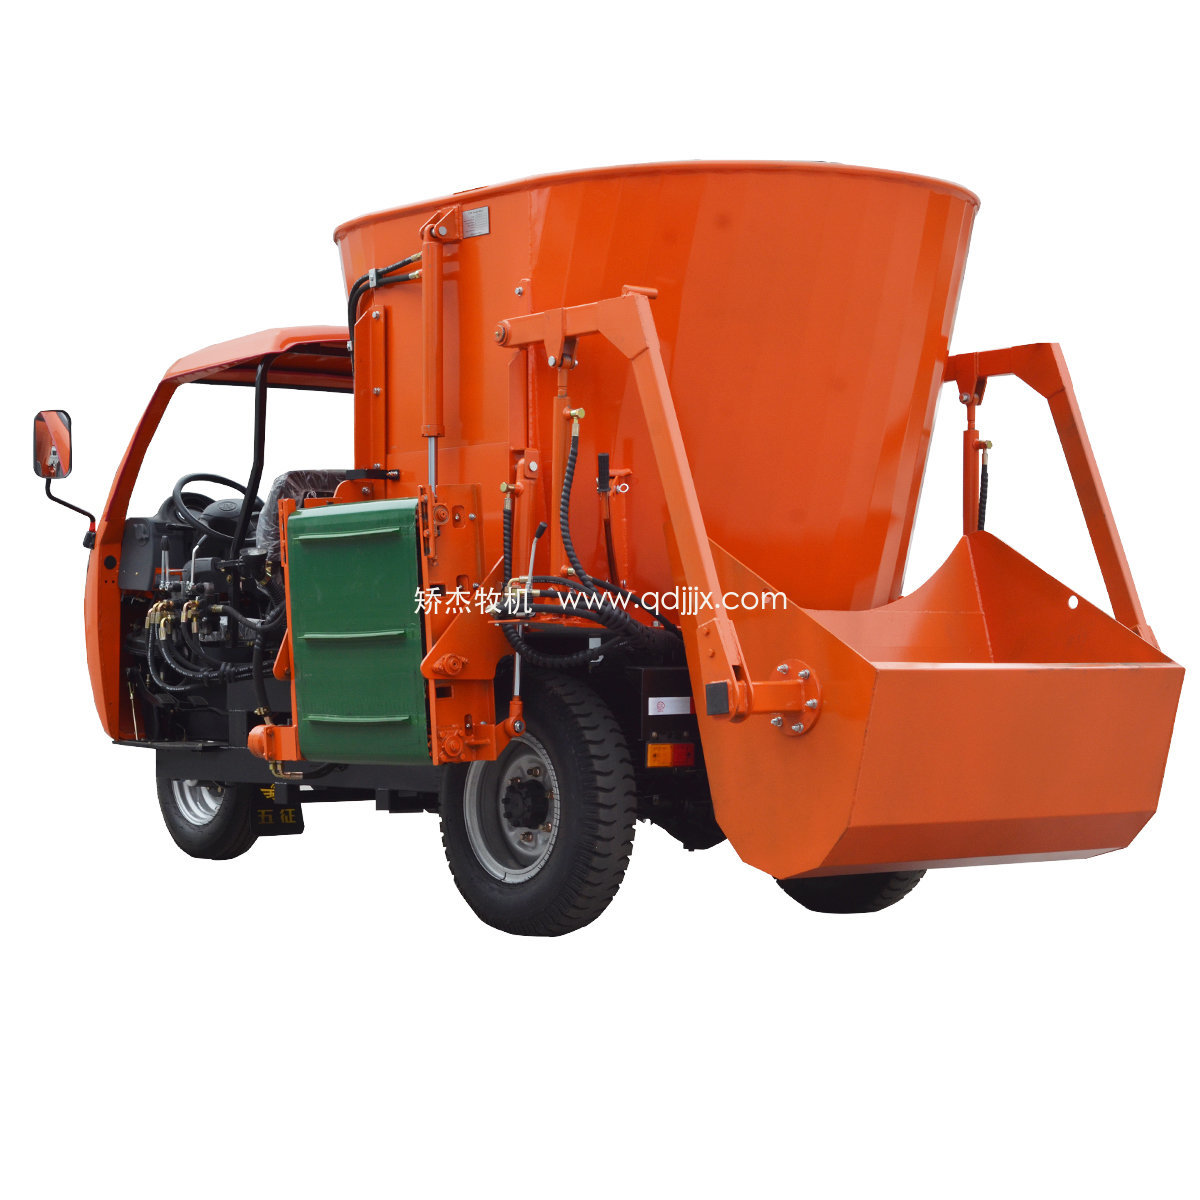 Self-propelled TMR Mixer Conveyor and Loader Type